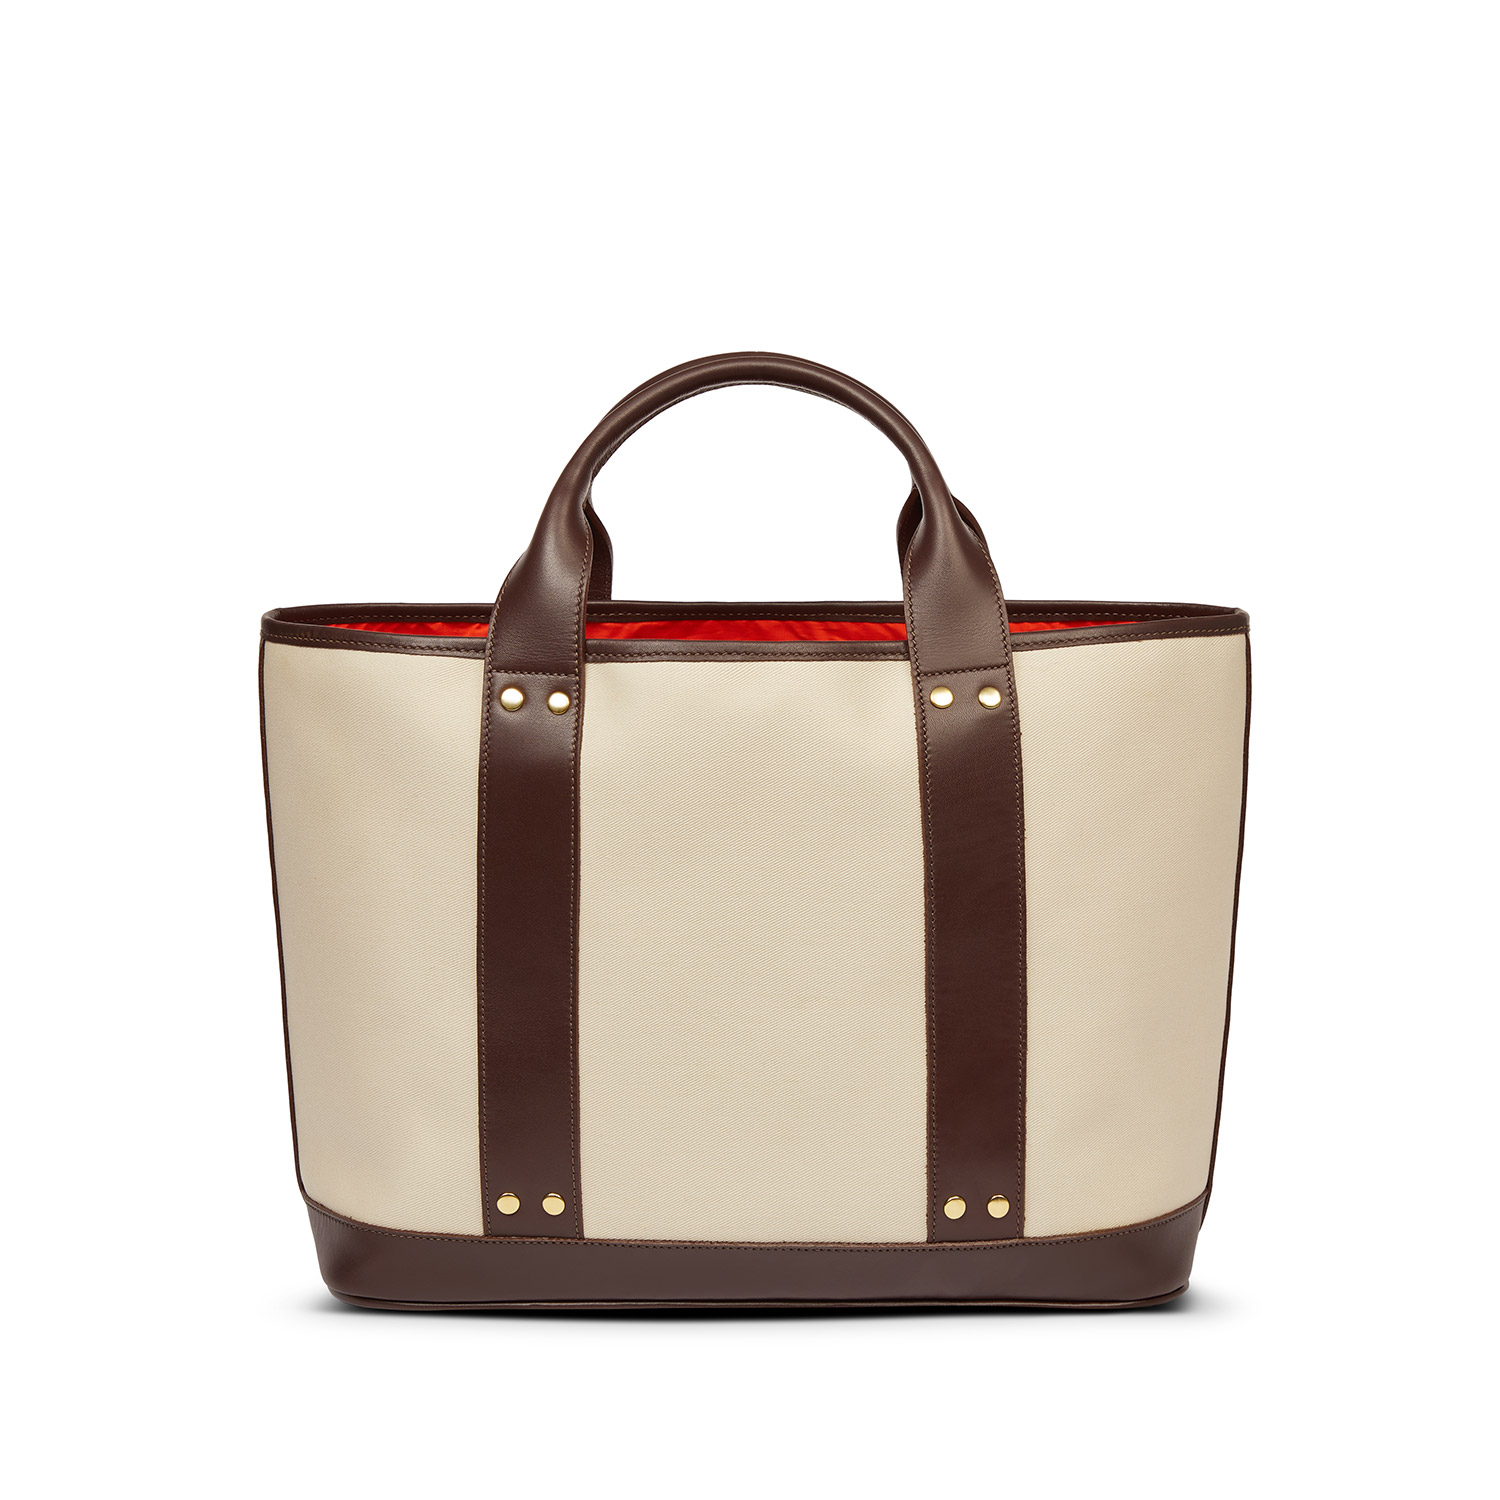 The Soleil Tote From The India Hicks + Tusting Collection